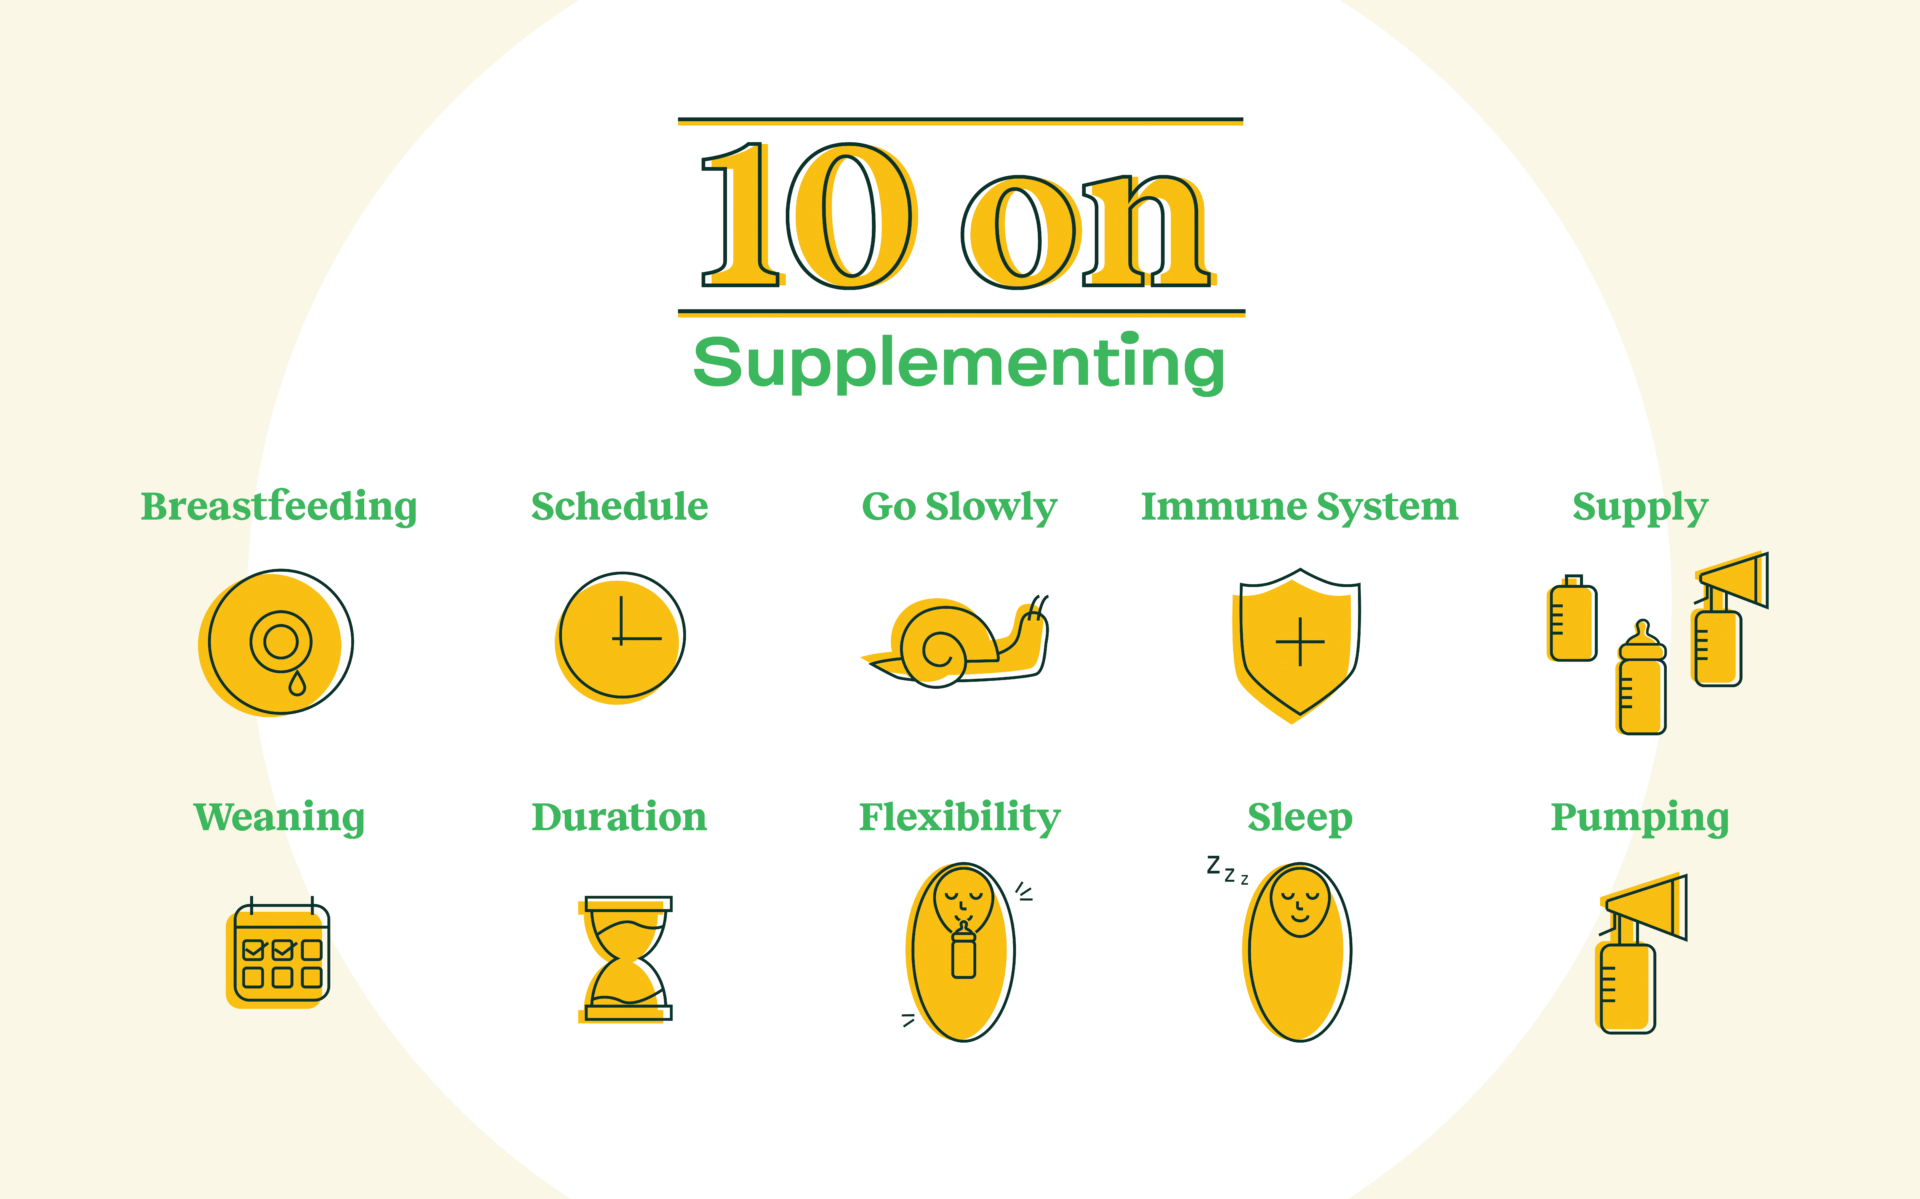 pictograph describing supplementing with baby formula